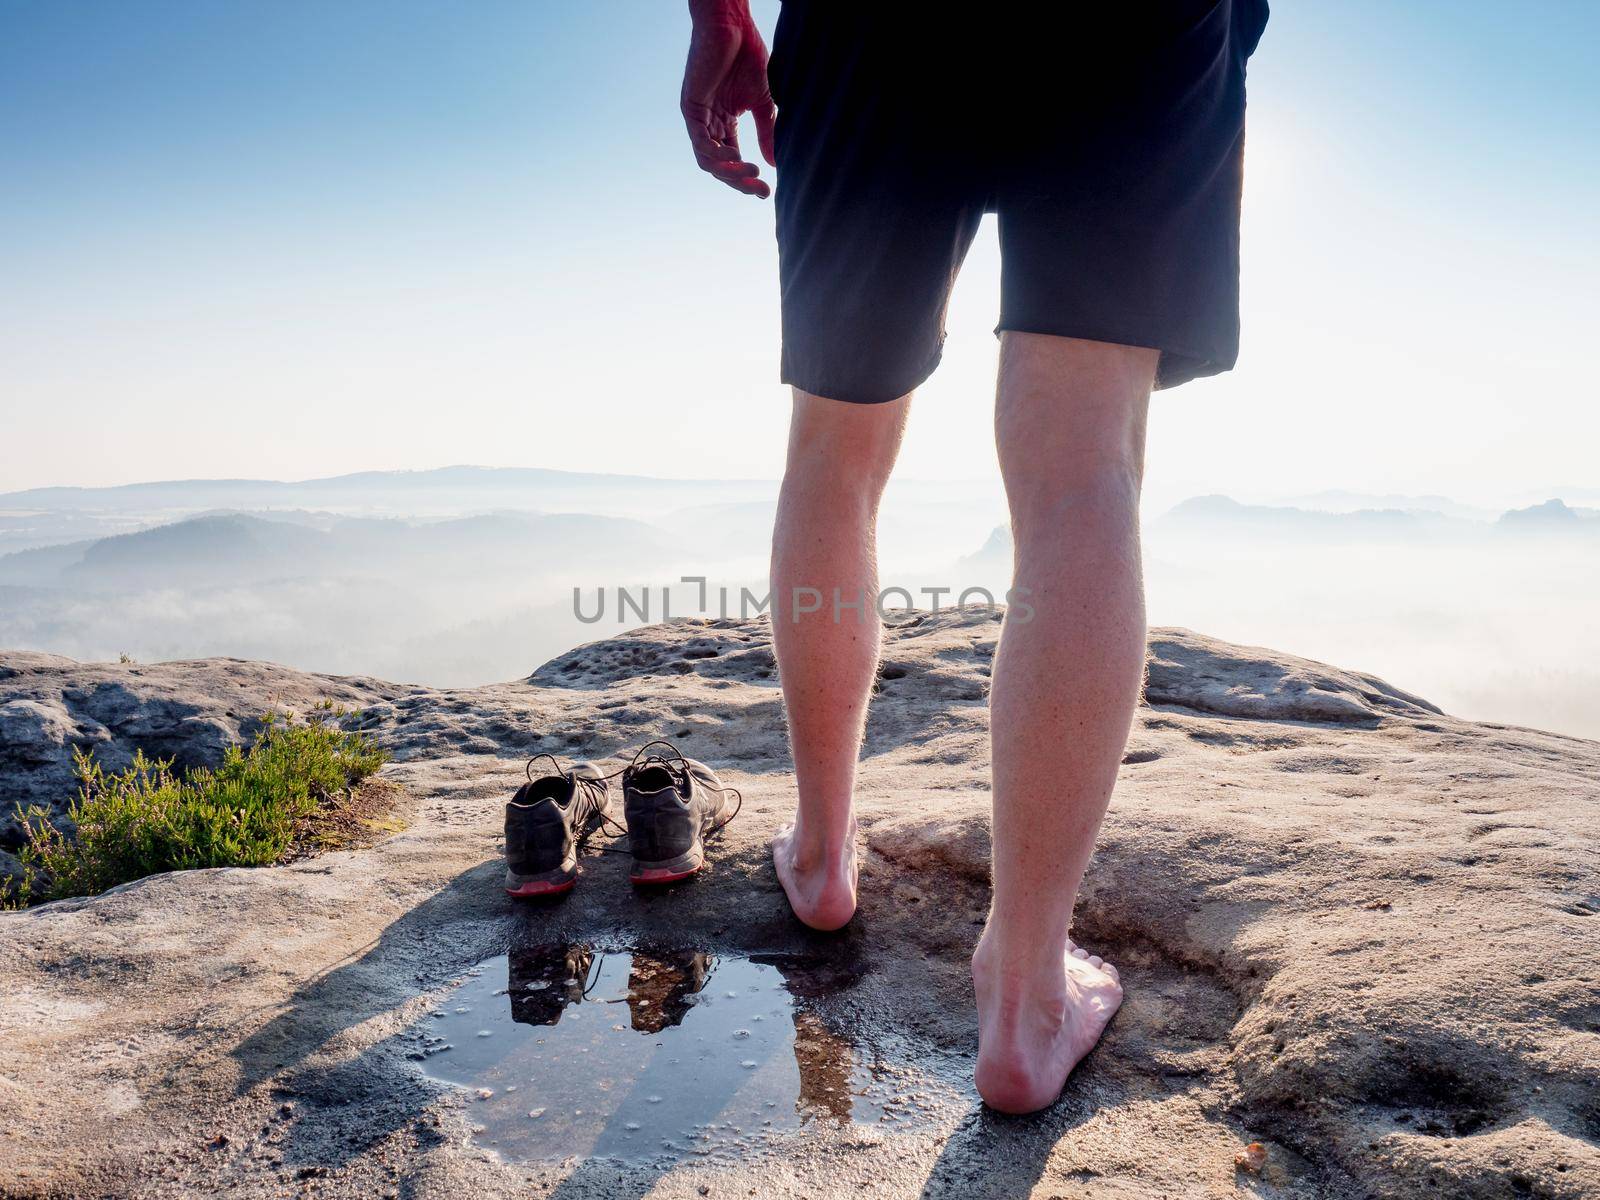 Hiker next to taken off shoes and water puddle on sandstone rock edge enjoy misty landscape view